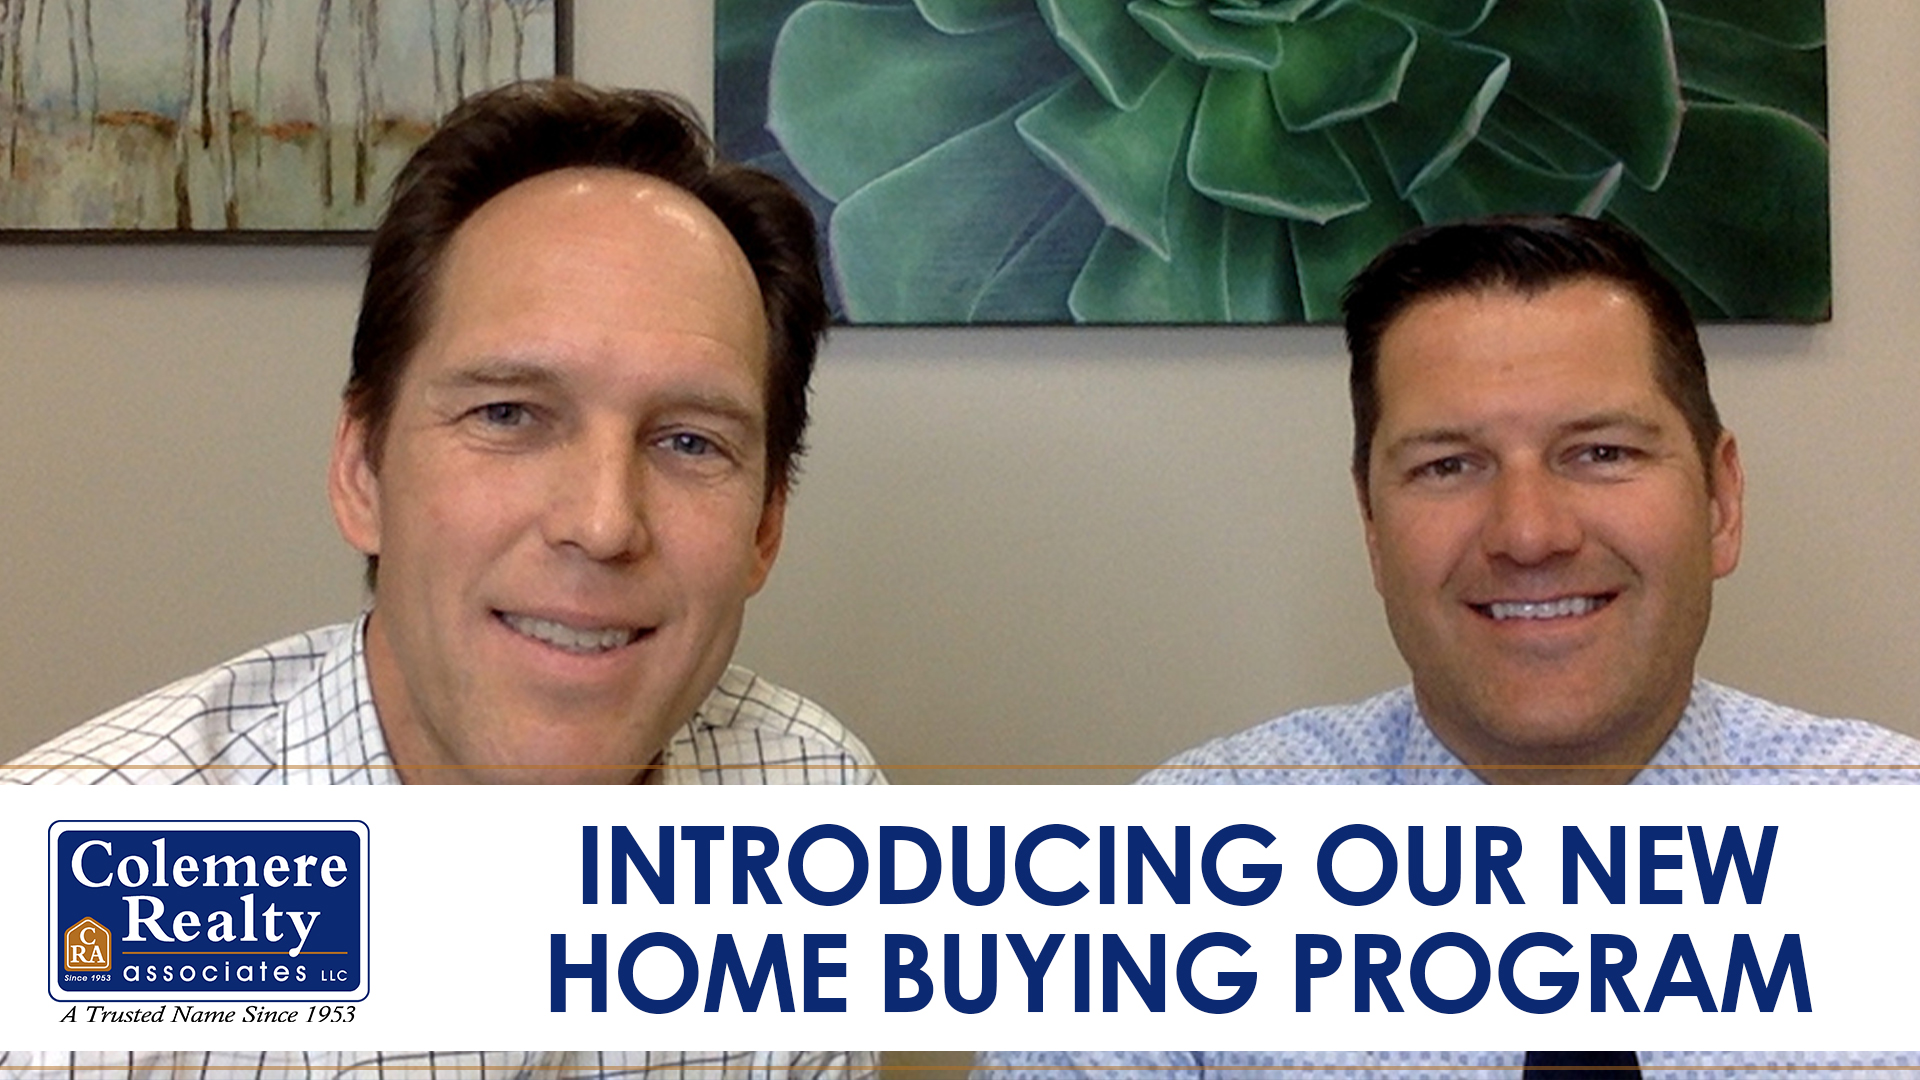 How to Qualify for Our New Hybrid Home Buying Program